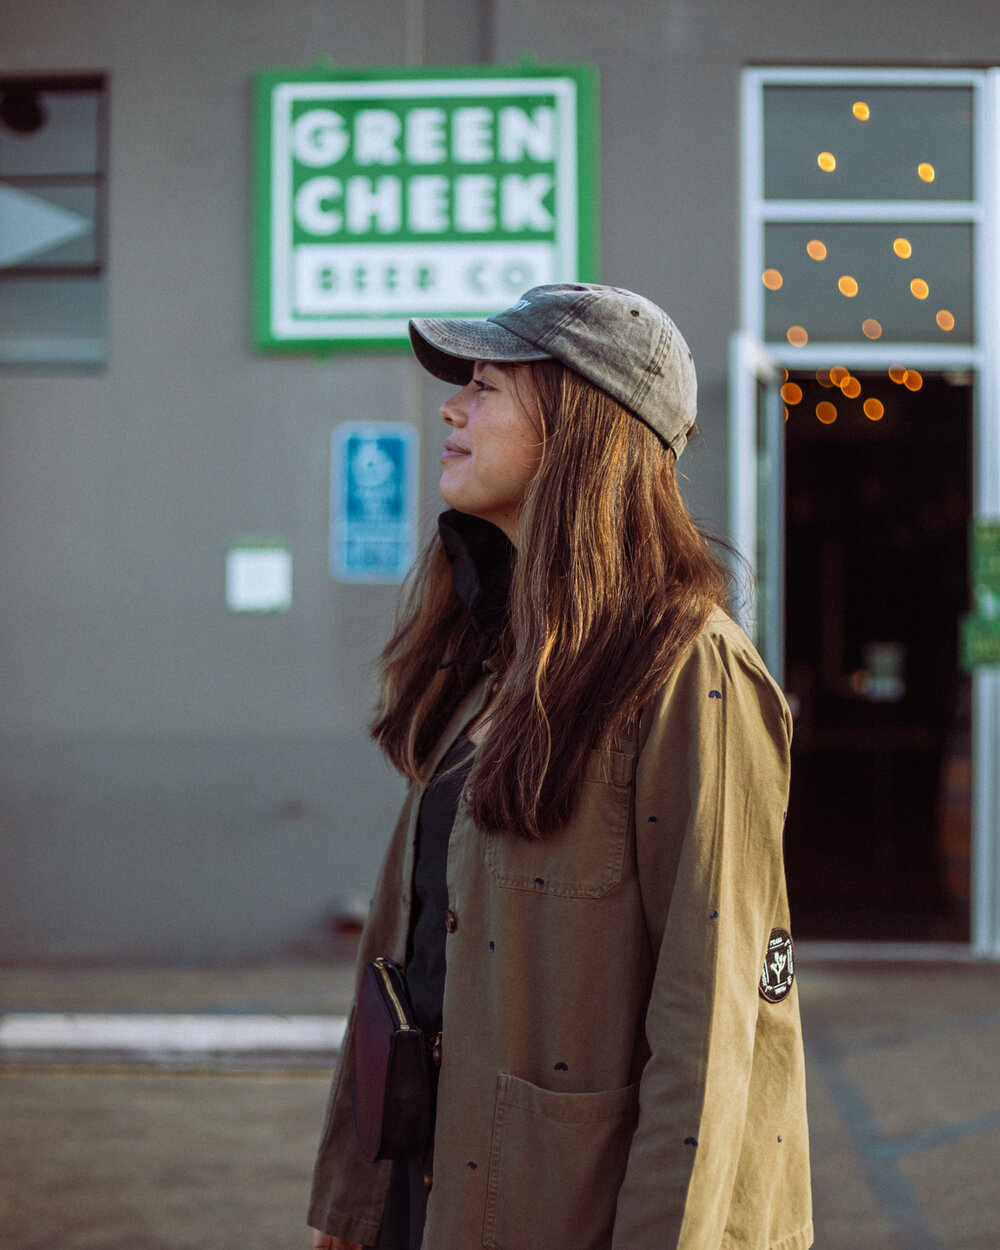 Rachel Off Duty: A Woman in a Green Jacket and Gray Hat Standing in Front of a Brewery